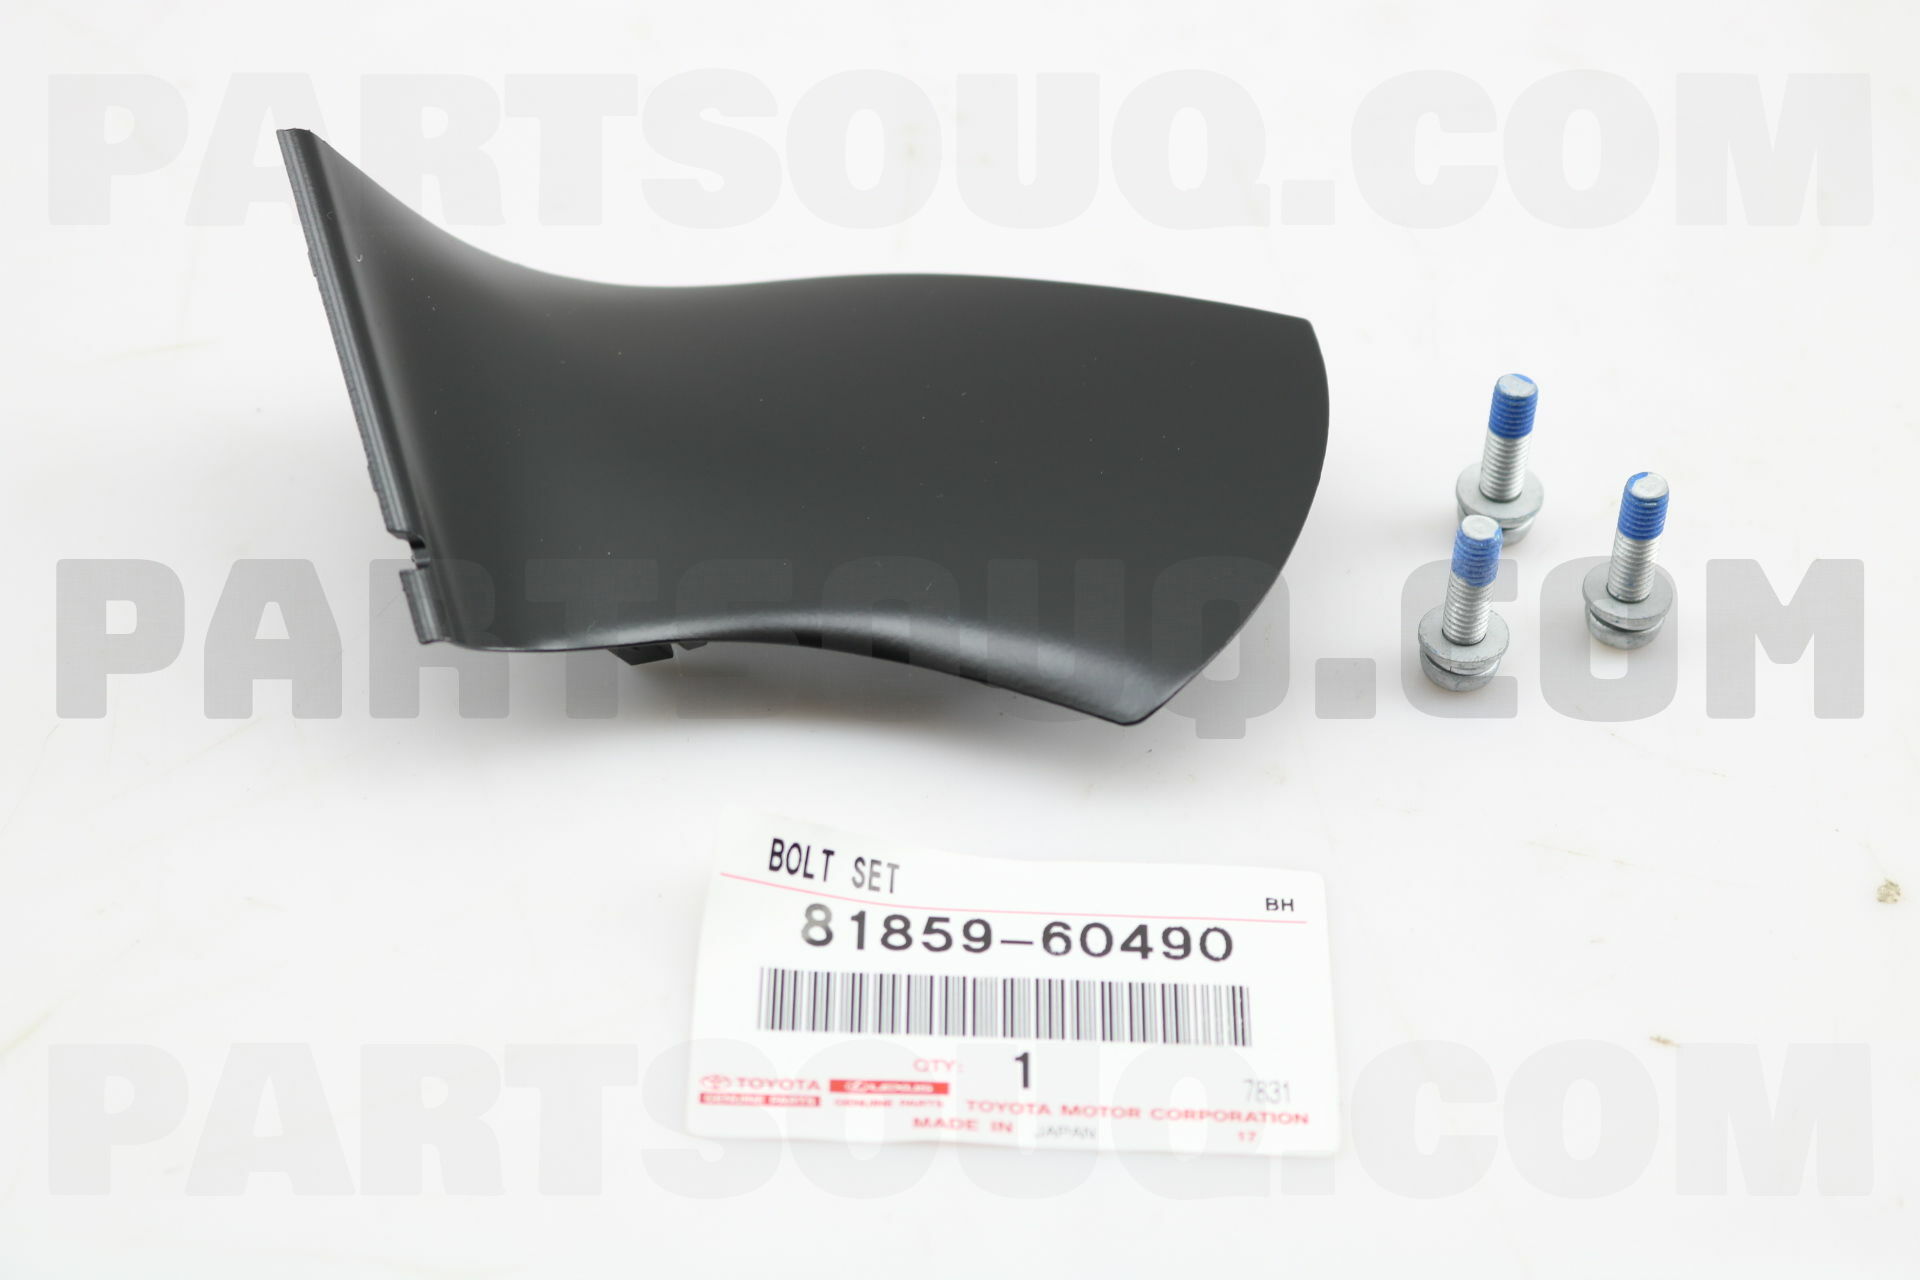 8185960490 Genuine Toyota COVER OUTER MIRROR HOLE LH 81859-60490 